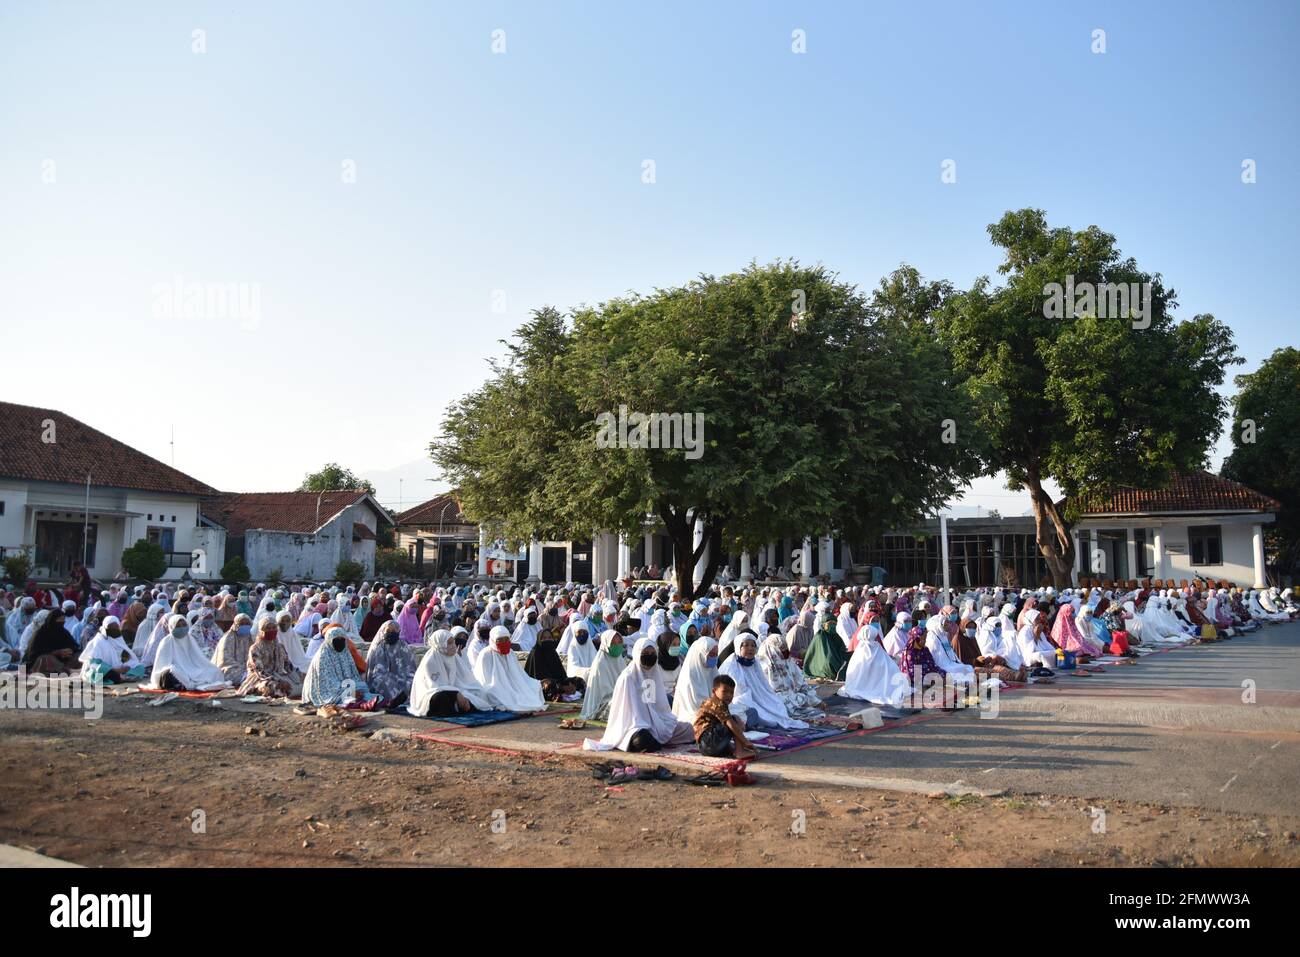 Majalengka, West Java, Indonesia - July 31, 2020 : Indonesian Muslims in suburban attend Eid Al-Adha prayers in a yard at a local mosque Stock Photo